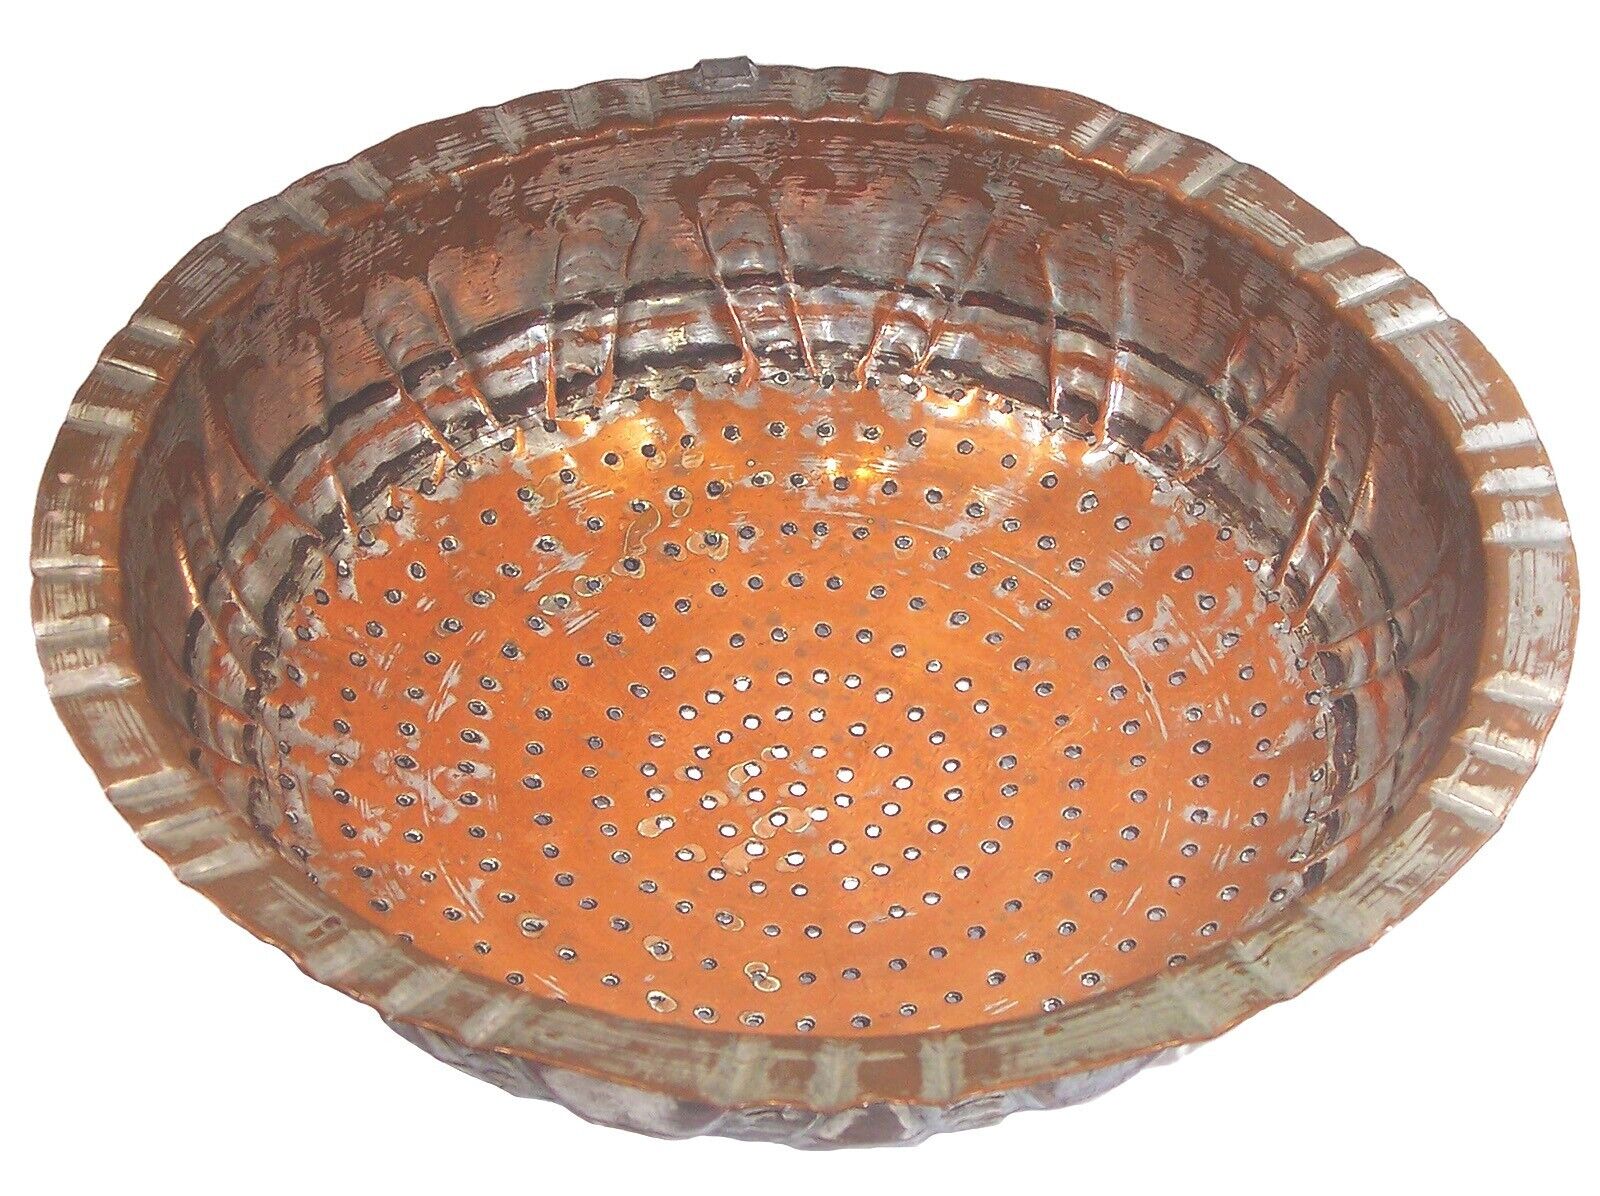 Antique Middle Eastern 19C Hand-Wrought Tinned Copper Colander/Strainer 12” Diam